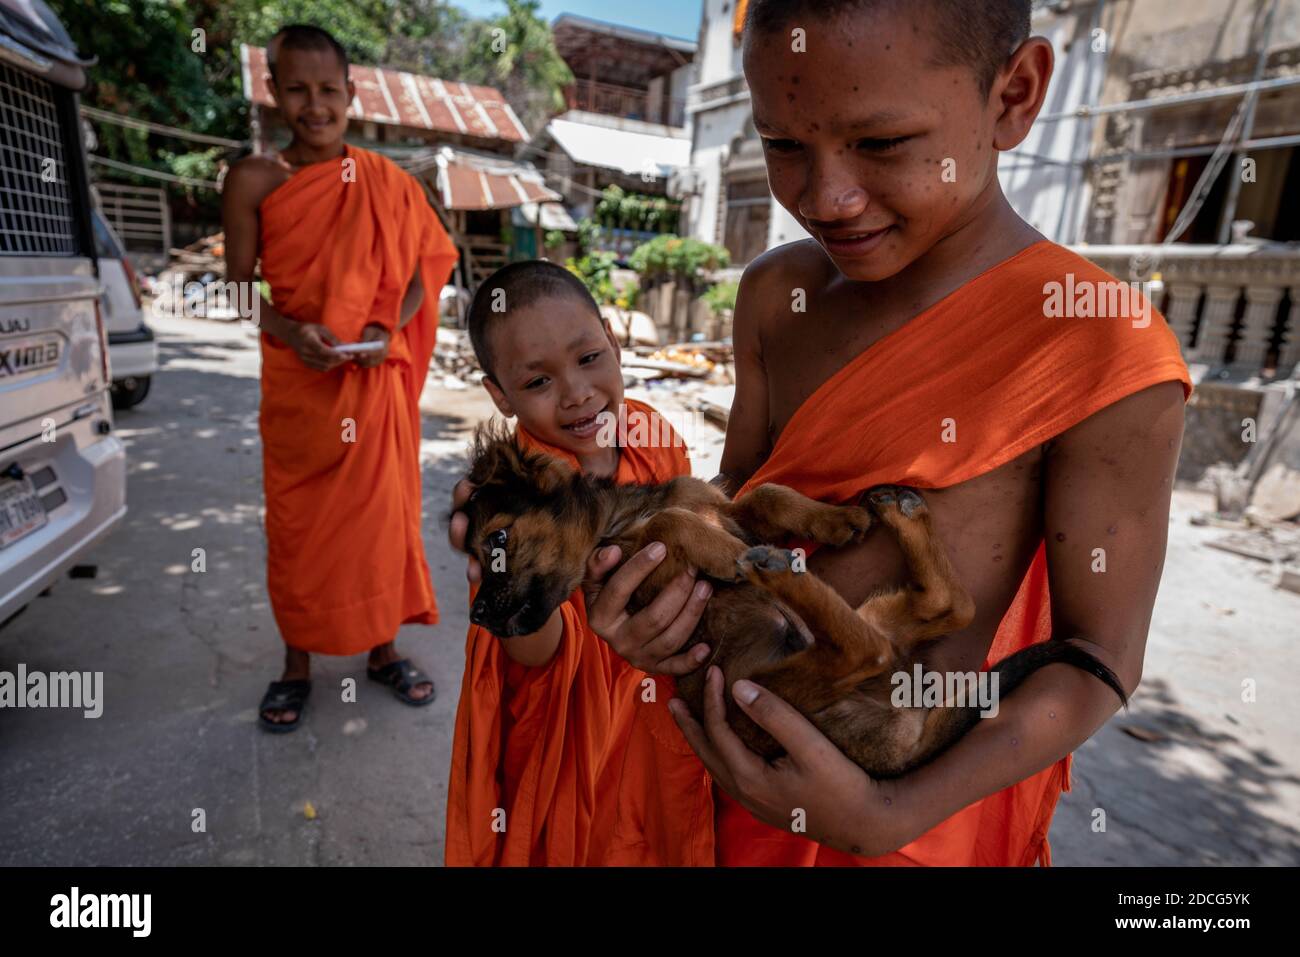 Svay Rieng, Cambodia. 18th July, 2020. Young Monks play with a dog at a pagoda.An estimated 800 people a year die of rabies in Cambodia, one of the highest deaths rates per capita in the world. At the root of Cambodia's endemic are unvaccinated dogs, in a country with one of the highest dog to human ratios in the world. Efforts at achieving herd immunity are significantly disrupted by the 3 million dogs per year slaughtered for Cambodia's dog meat trade. Some experts have warned that unless the dog meat trade is addressed, rabies will still remain prevalent. (Credit Image: © Andy Ball/SOPA Stock Photo